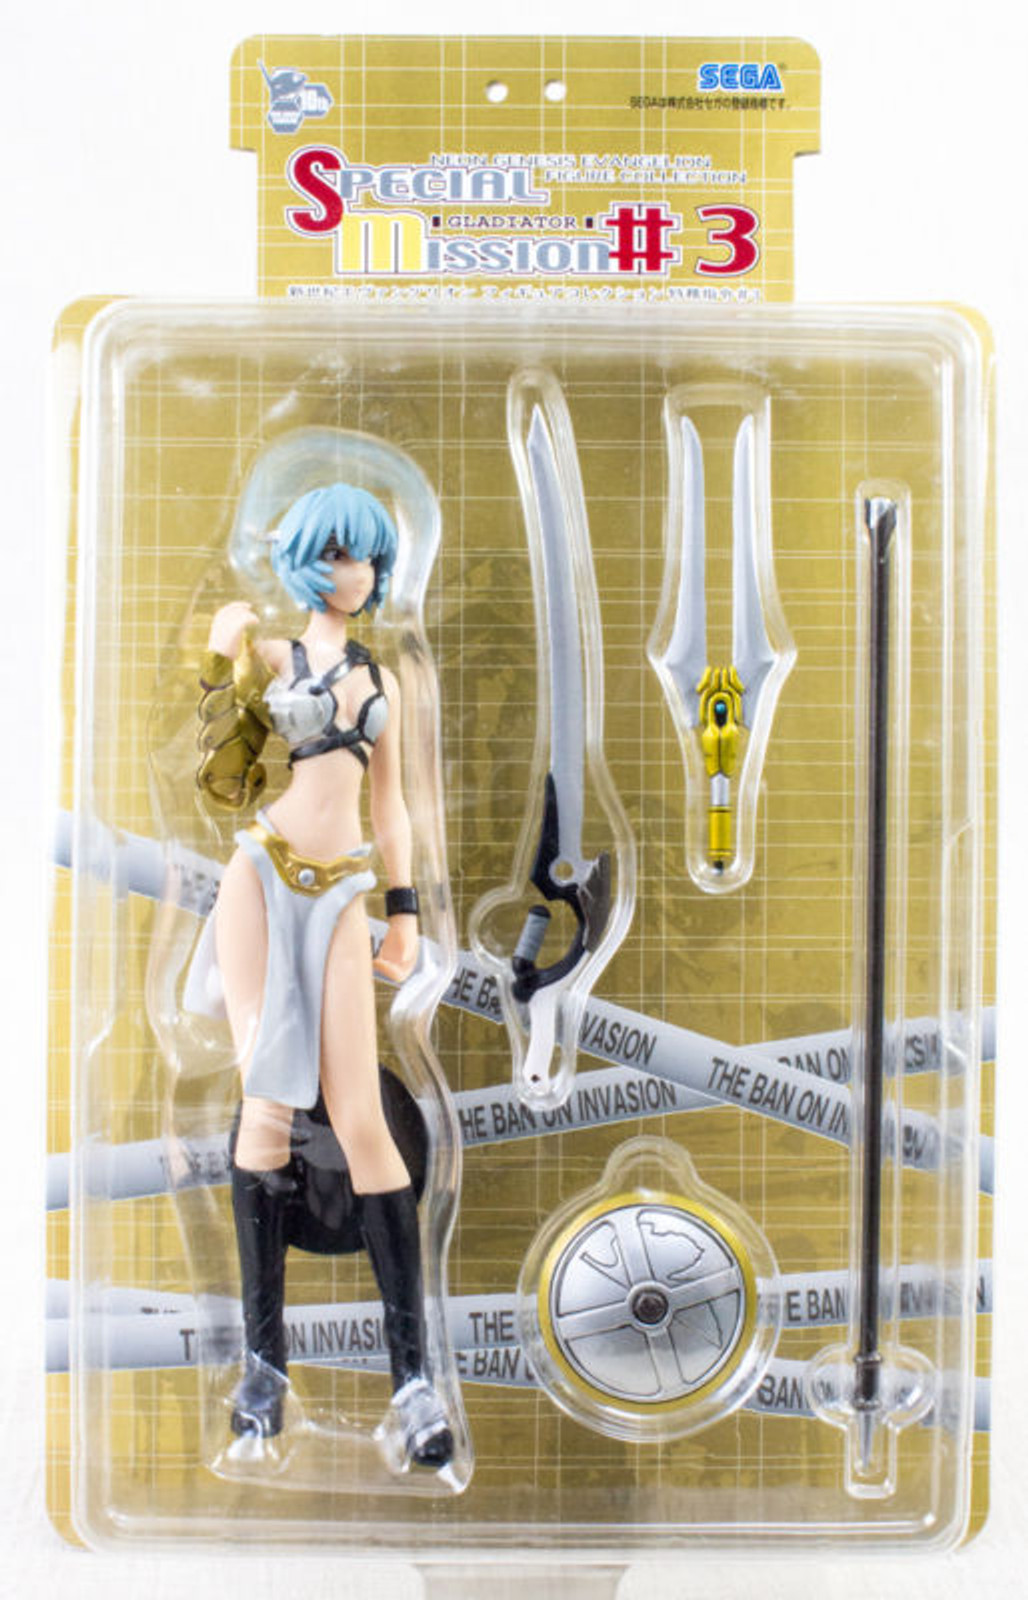 Evangelion Rei Ayanami Figure collection Special Mission #3 Gradiator JAPAN ANIME MANGA